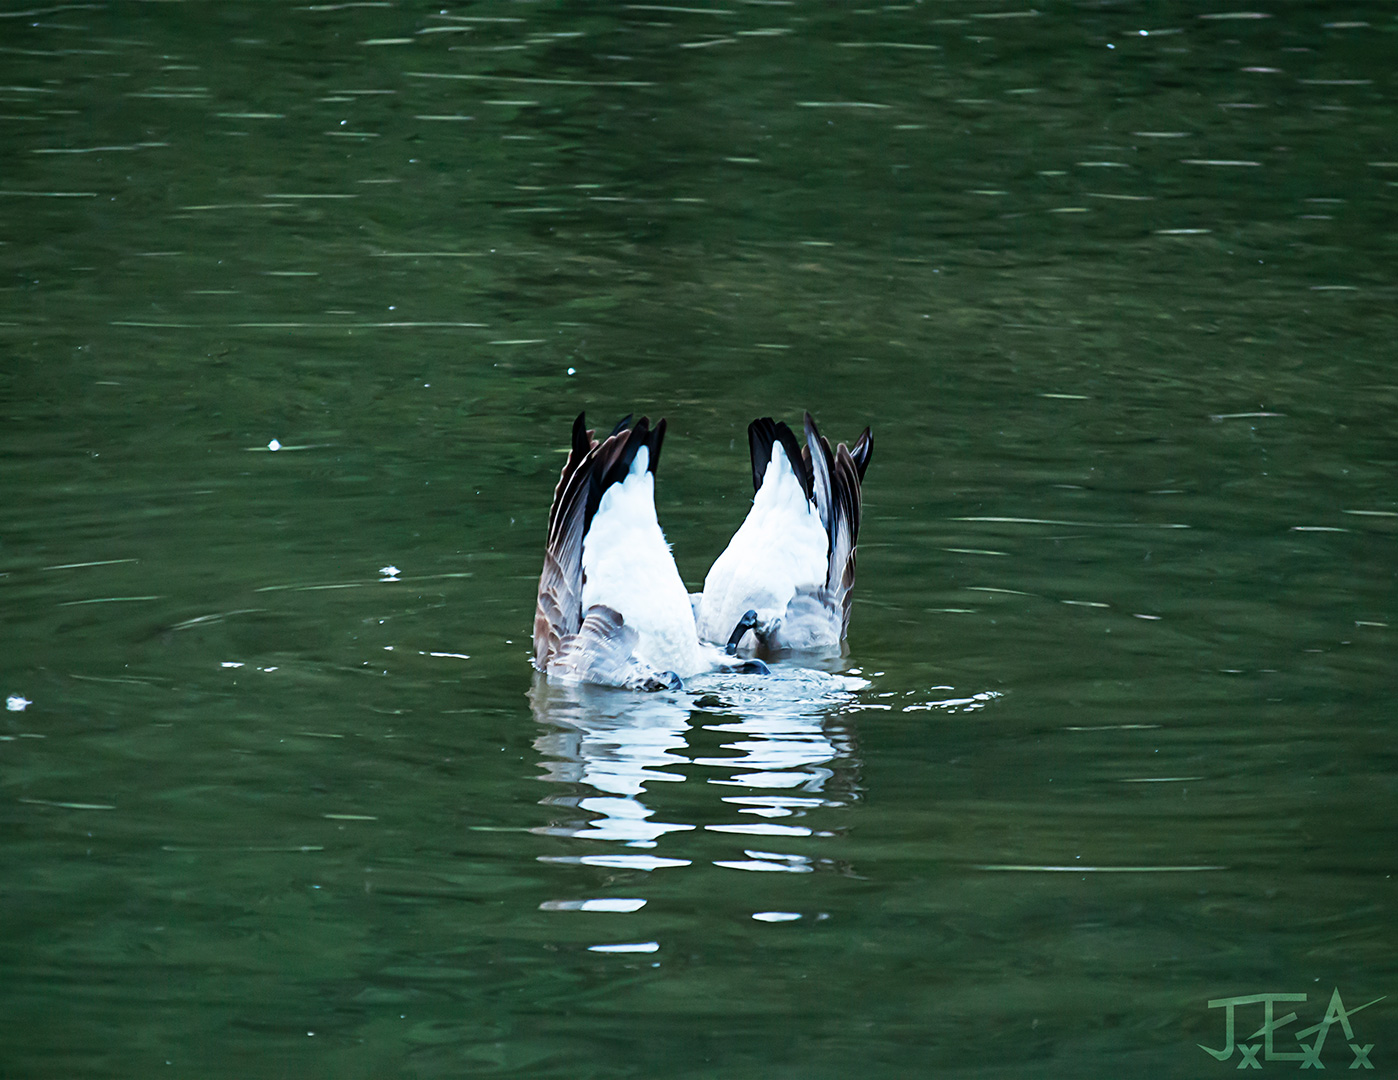 two Canadian geese simoultaneously dive under water to eat, leaving their butts sticking straight up out of the water.